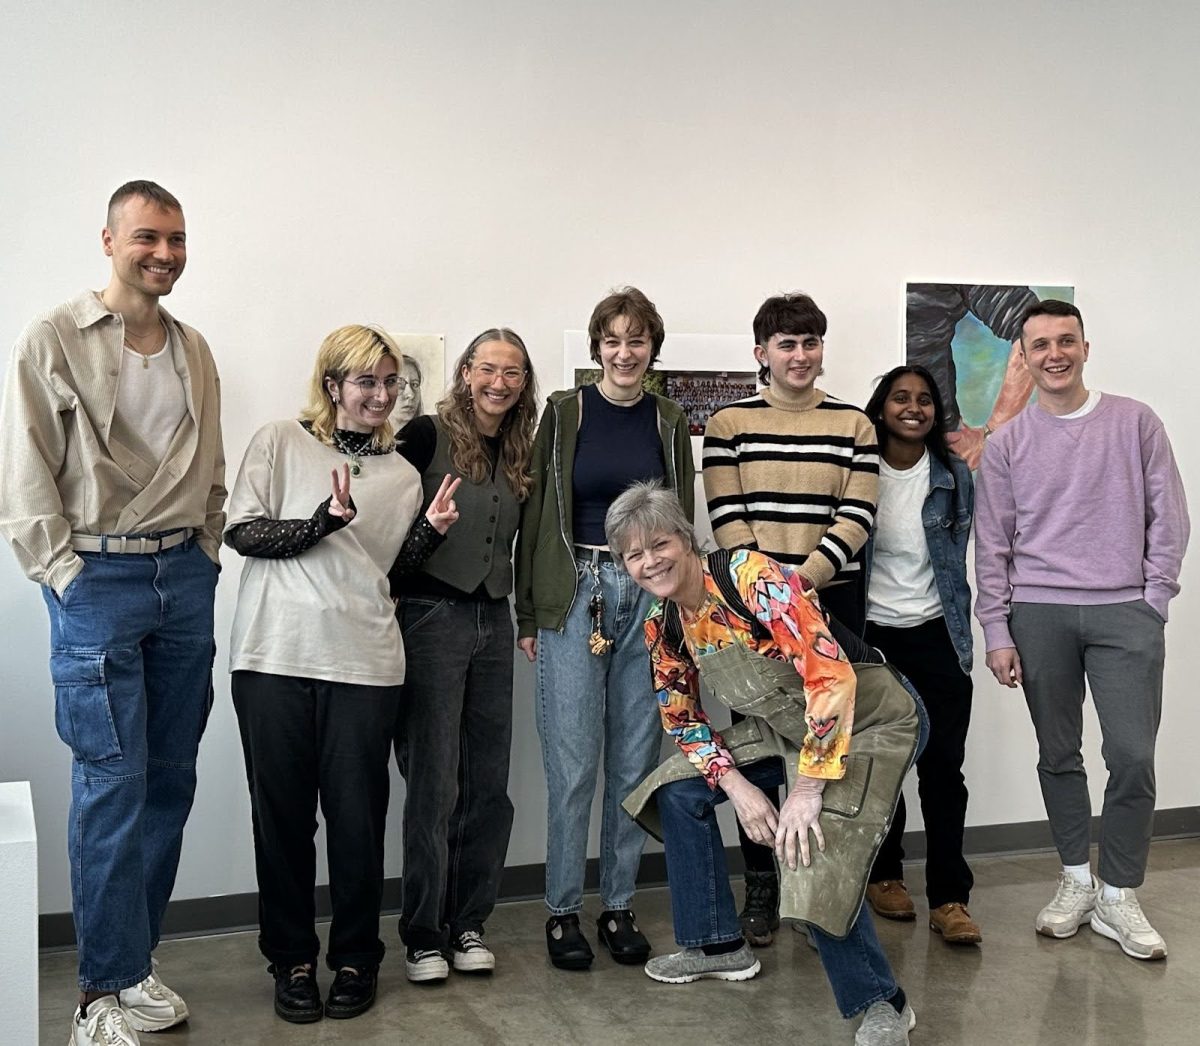 Cat+Reddington%2C+one+of+the+two+juror%E2%80%99s+award+winning+students%2C+in+the+striped+crewneck+standing+with+other+fellow+student+artists.+%28Photo+by+Bridgette+Fraga%29